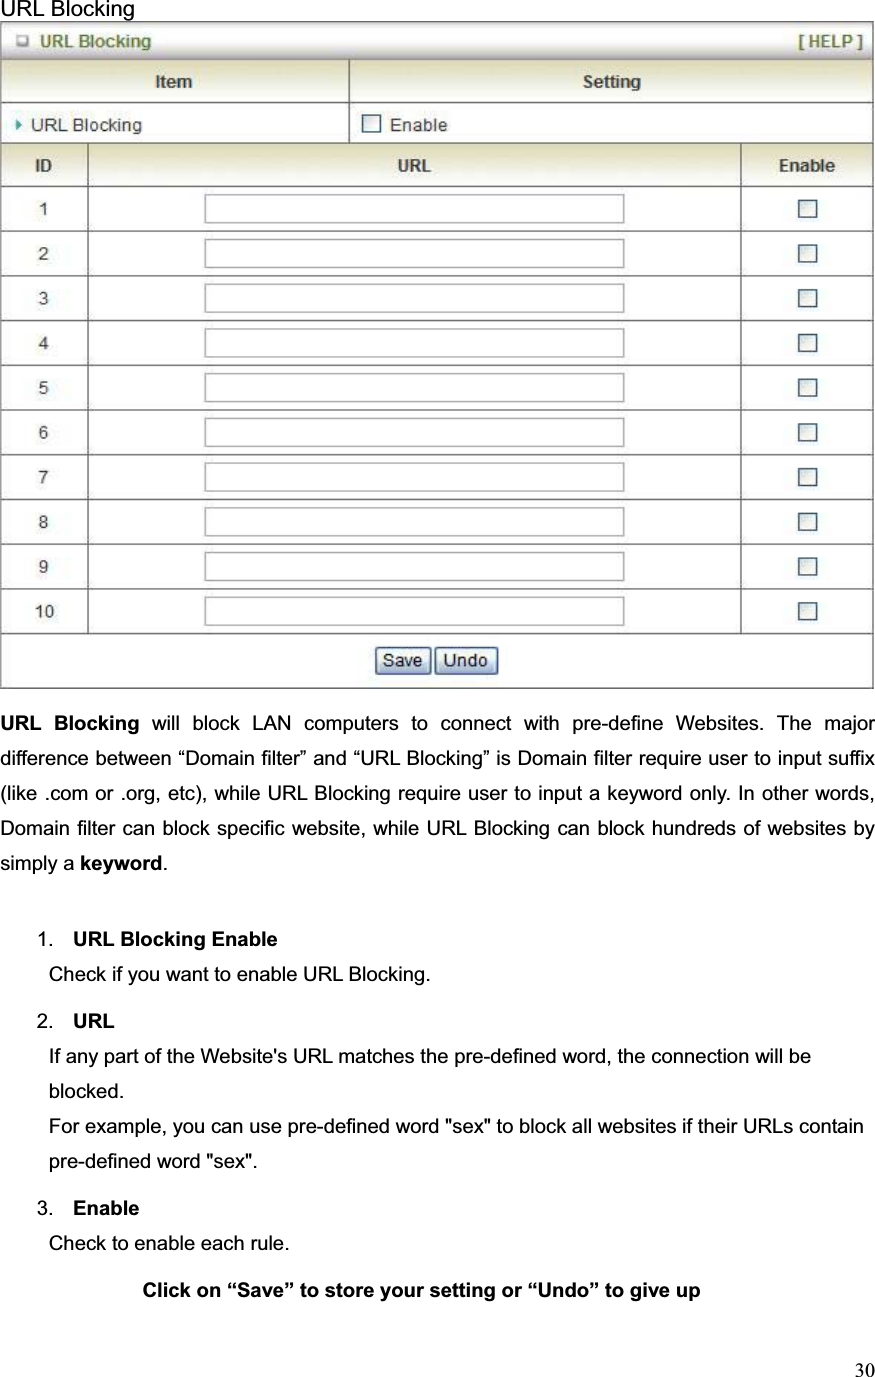 30URL Blocking URL Blocking will block LAN computers to connect with pre-define Websites. The major difference between “Domain filter” and “URL Blocking” is Domain filter require user to input suffix (like .com or .org, etc), while URL Blocking require user to input a keyword only. In other words, Domain filter can block specific website, while URL Blocking can block hundreds of websites by simply a keyword.1. URL Blocking Enable Check if you want to enable URL Blocking.   2. URLIf any part of the Website&apos;s URL matches the pre-defined word, the connection will be blocked. For example, you can use pre-defined word &quot;sex&quot; to block all websites if their URLs contain pre-defined word &quot;sex&quot;.   3. Enable Check to enable each rule. Click on “Save” to store your setting or “Undo” to give up